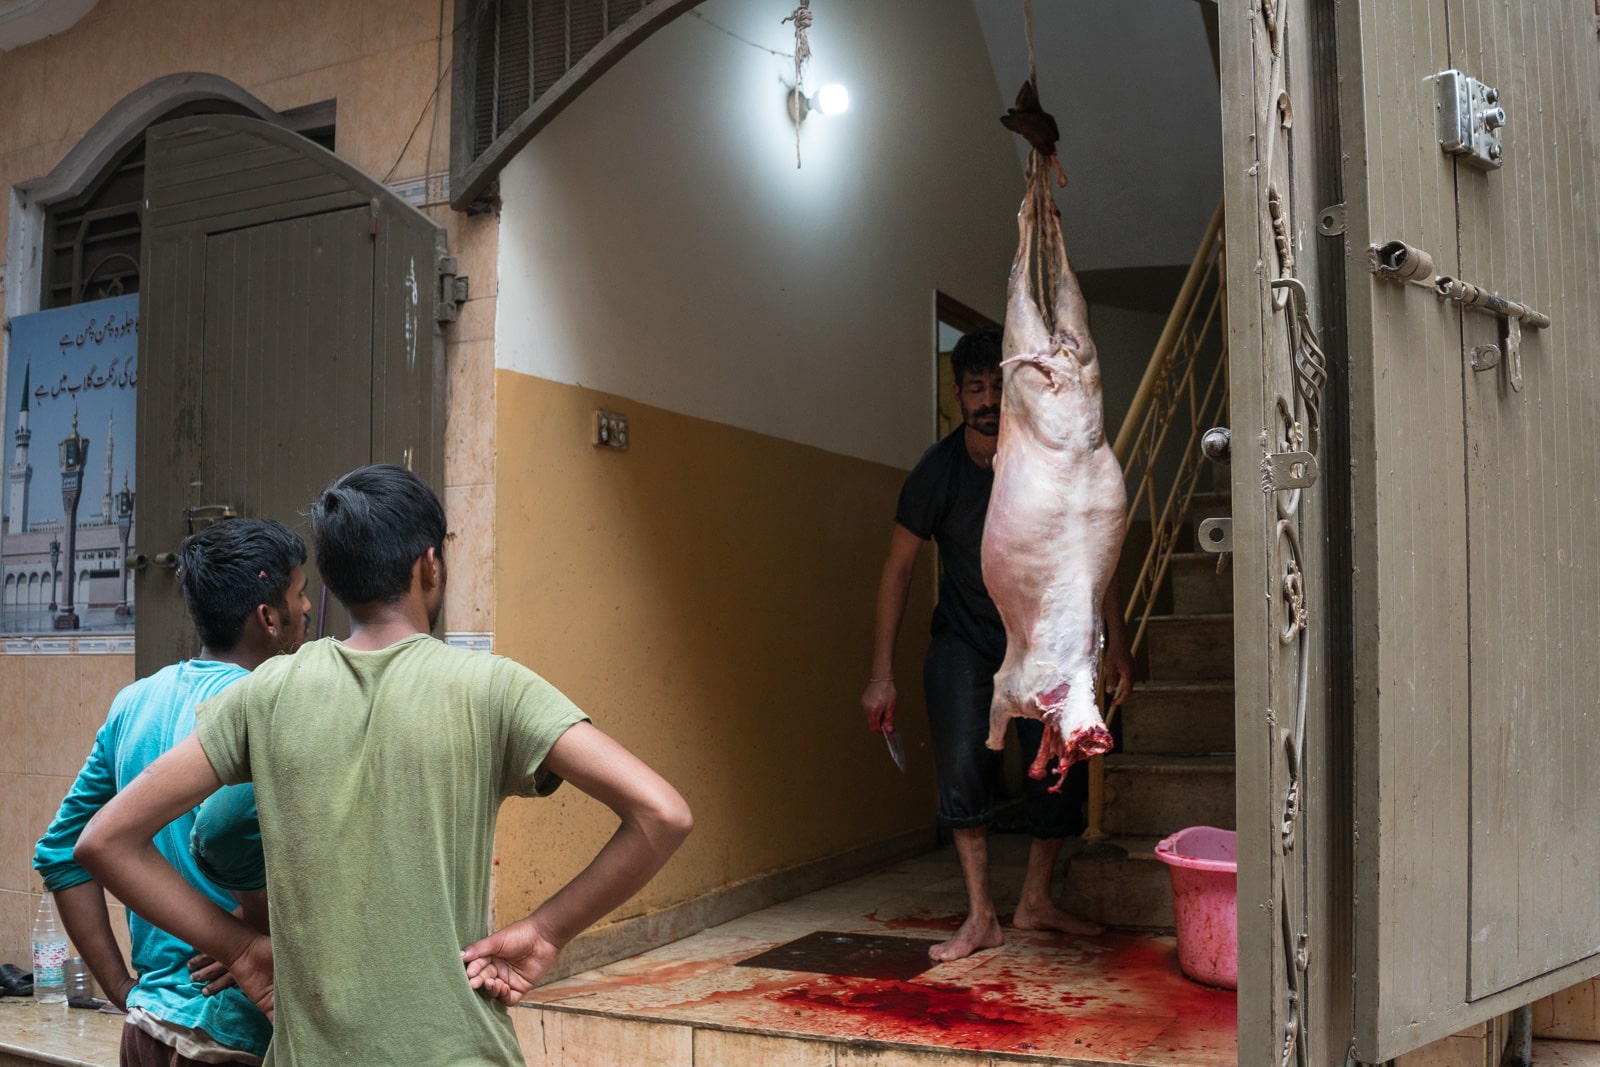 Celebrating Eid al-Adha in Lahore, Pakistan - Goat being skinned in a house - Lost With Purpose travel blog